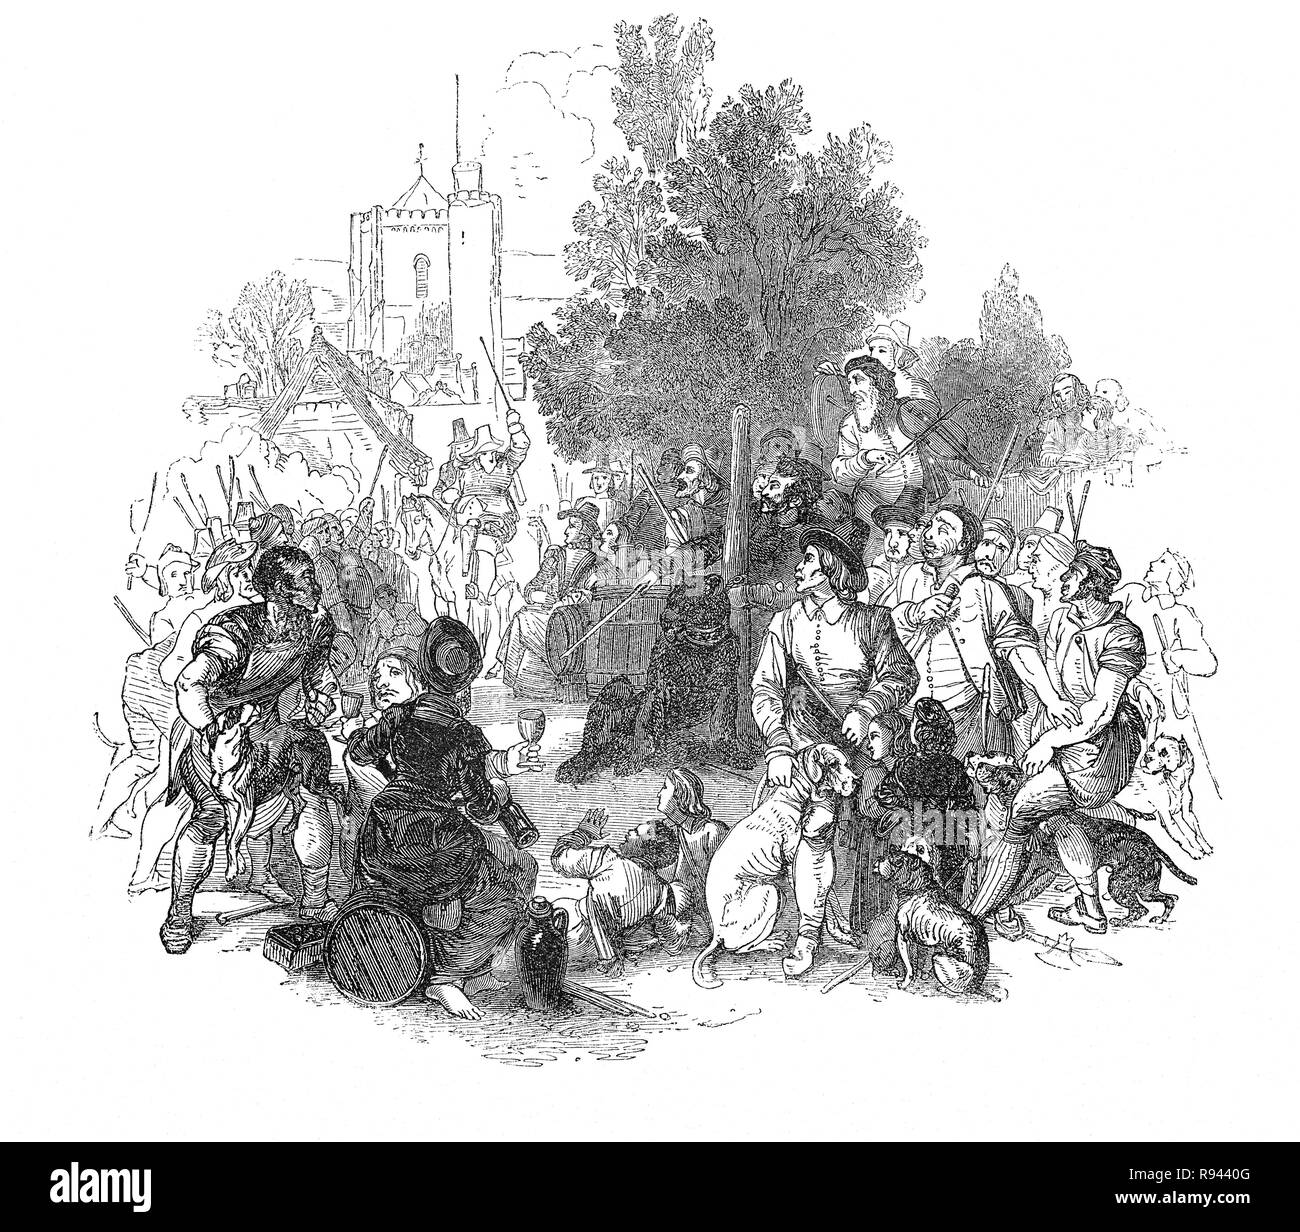 A scene from Hudibras, an English satirical polemic written by Samuel Butler(1613 – 1680), poet and satirist, mostly against Parliamenterians,Roundheads, Puritans, Presbyterians and other factions involved in the English Civil War of 1642-1651. The epic tells the story of Sir Hudibras and his squire, Ralpho who ride forth from the knight’s home to reform what they call sins and what the rest of the world regards as mild amusement. Here Sir Hudibras addresses a mob, who are about to indulge in bear baiting with dogs. Stock Photo